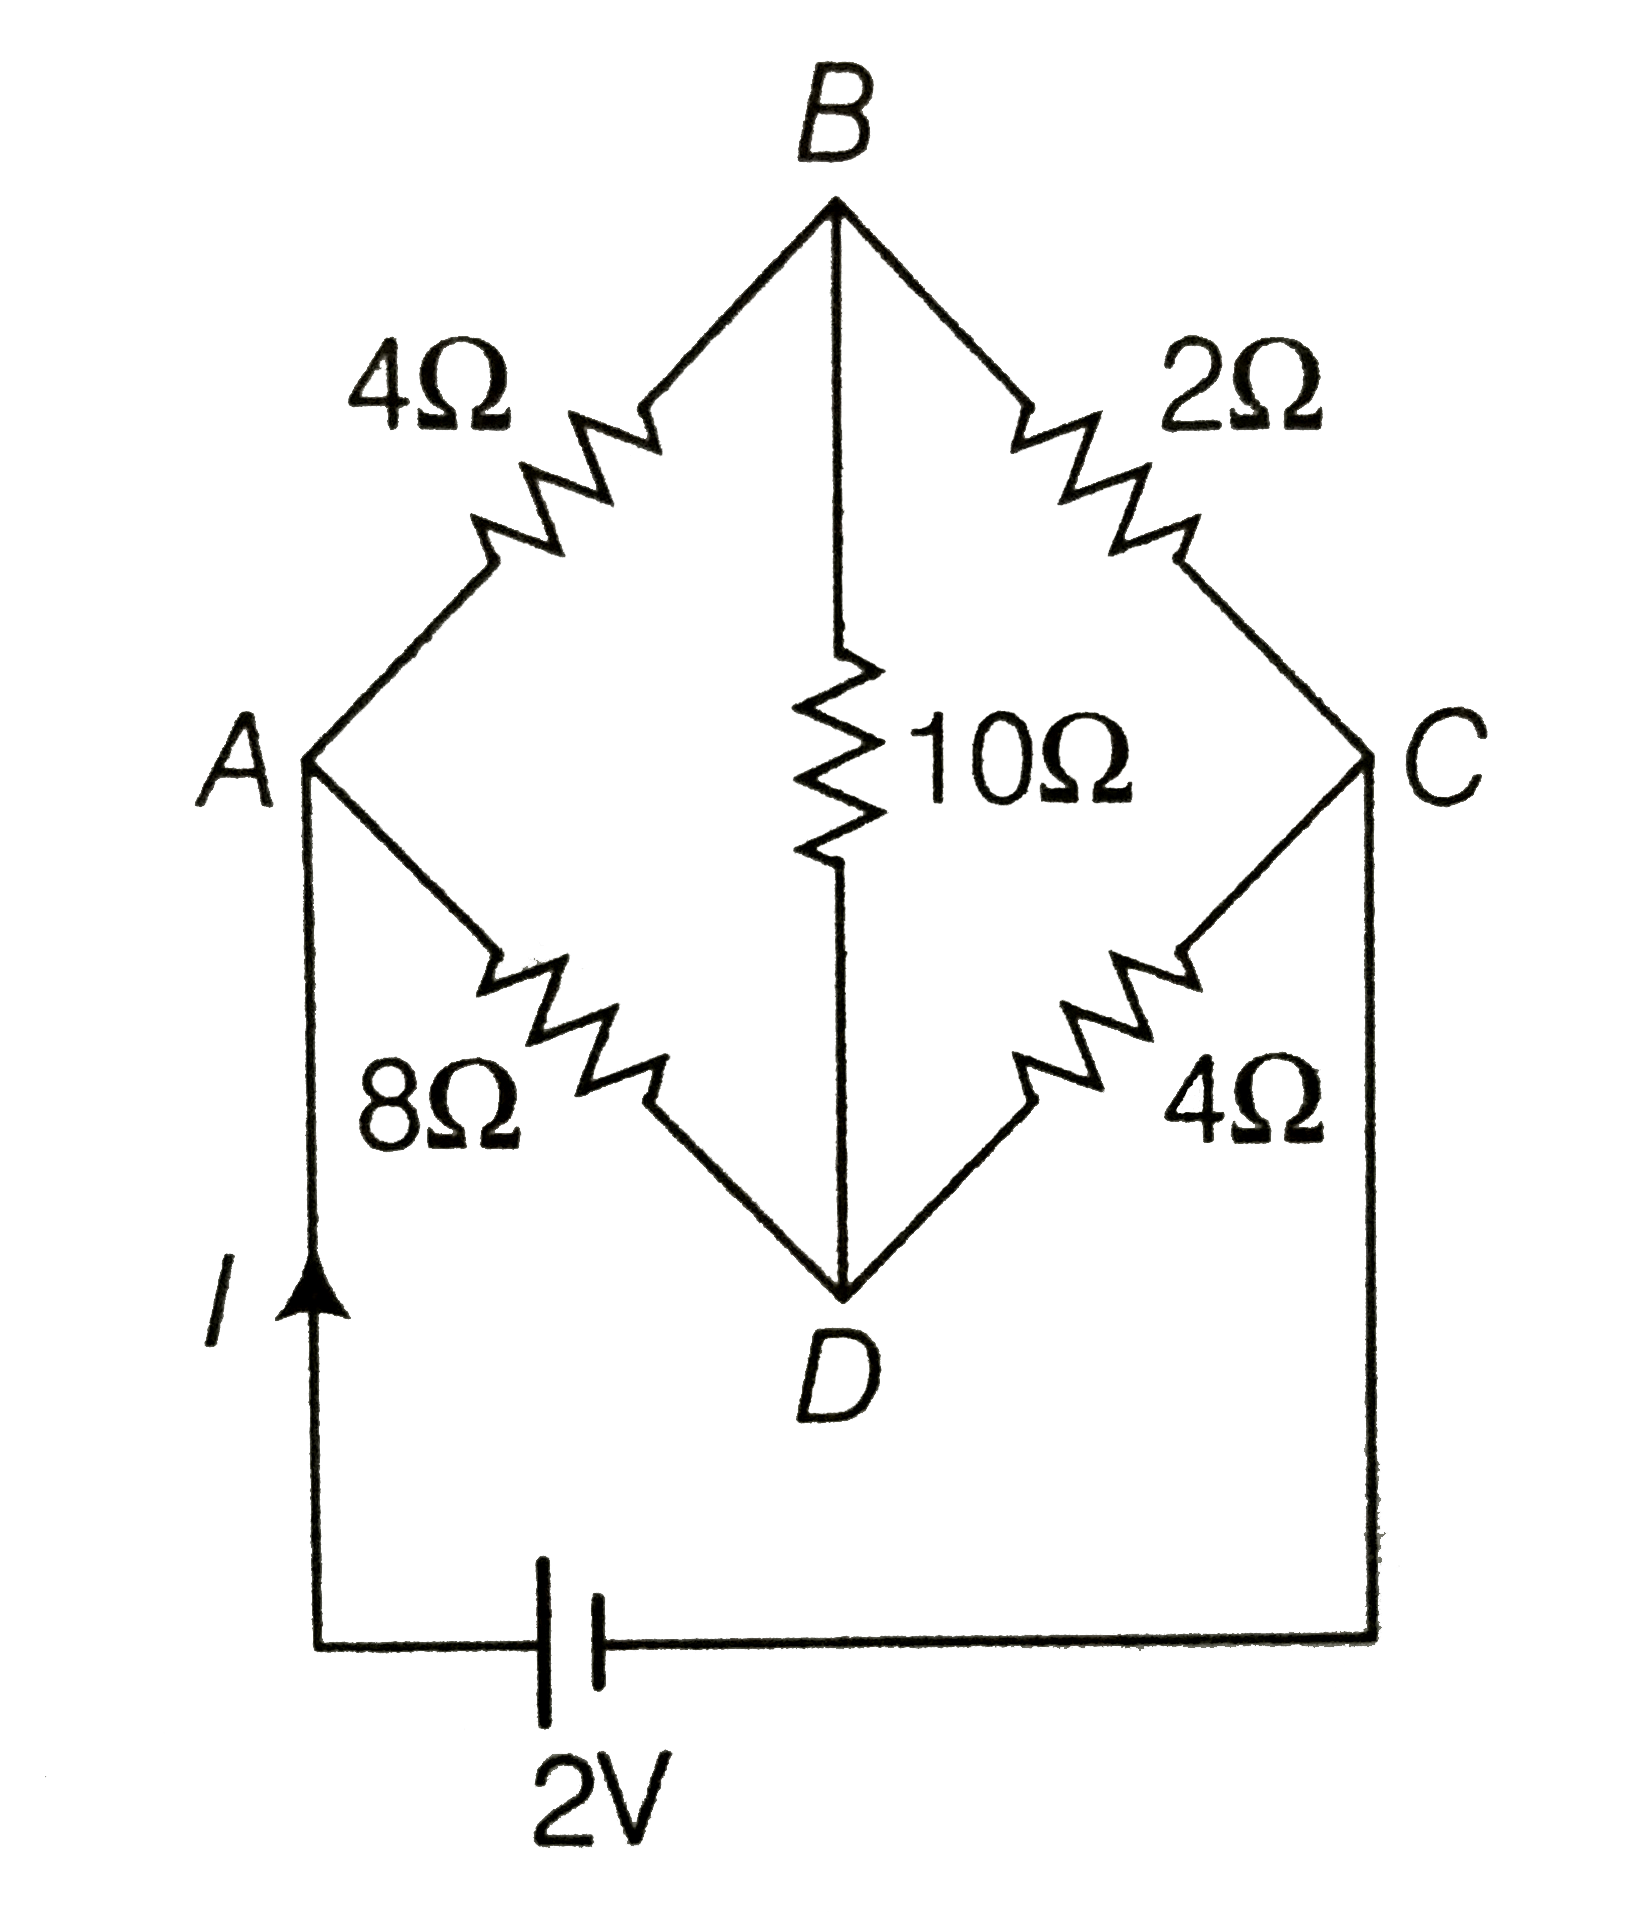 If the Wheateston's network shown in the figure, the current l in the circuit is